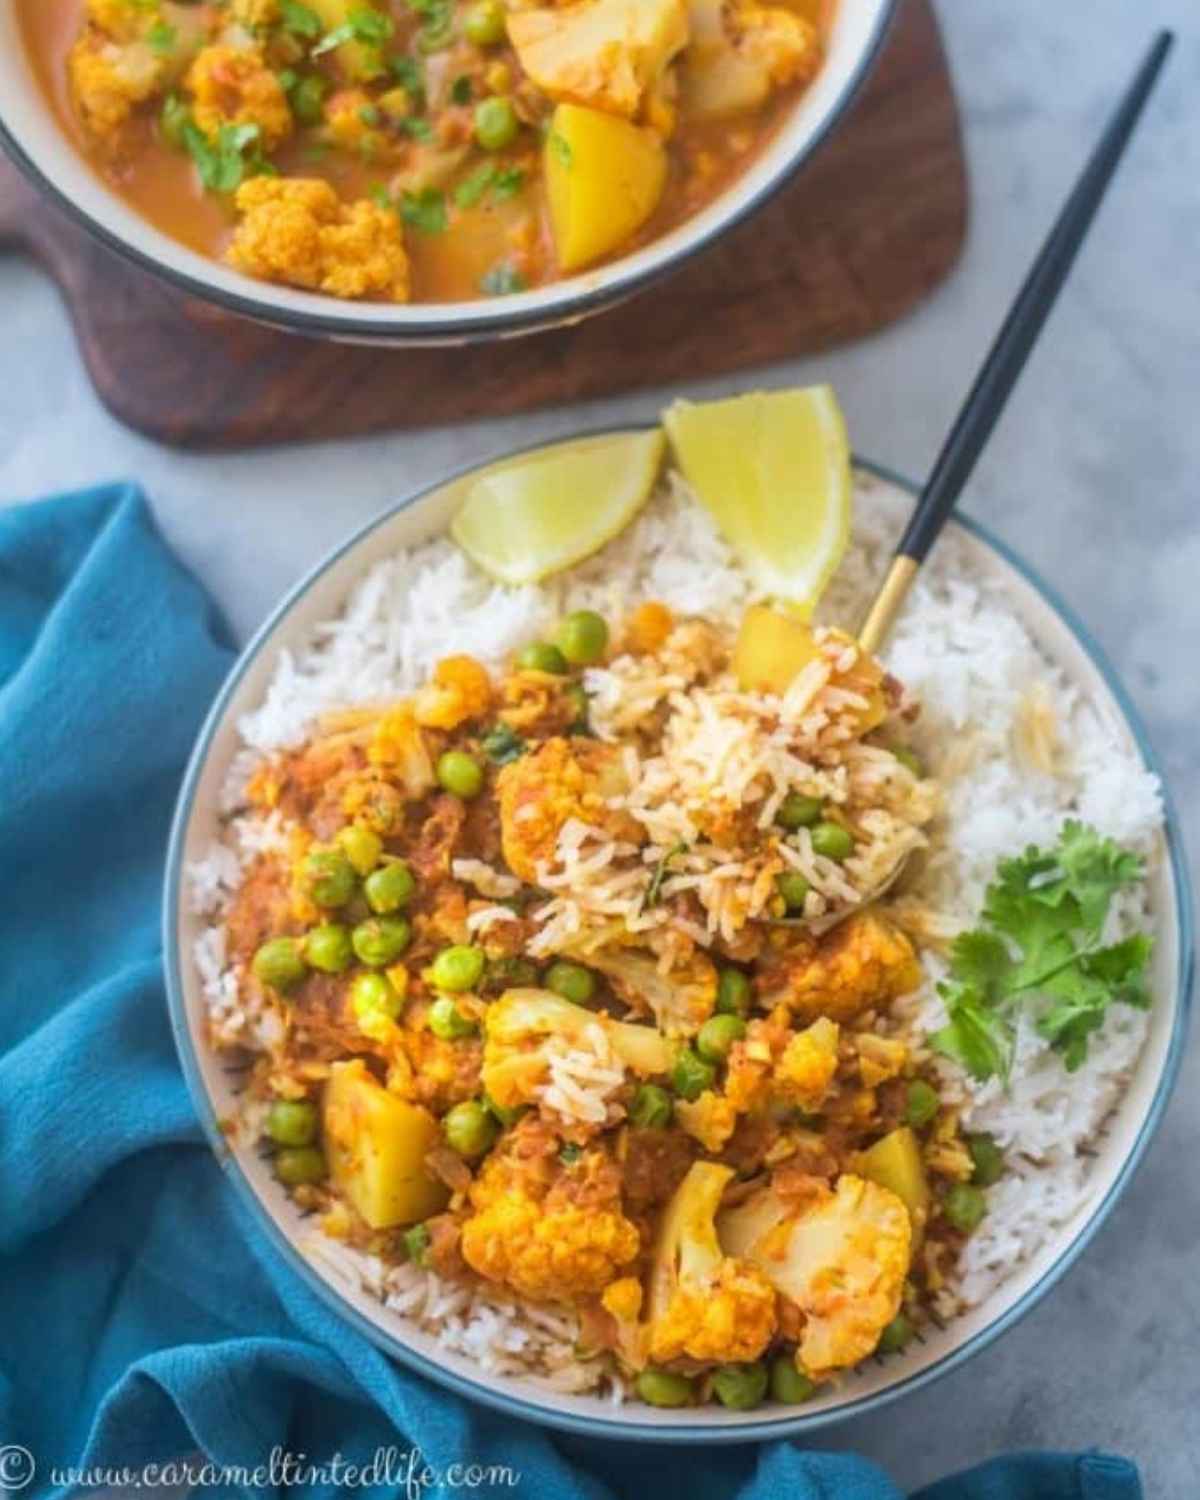 Top view of cauliflower and peas curry in a bowl with rice